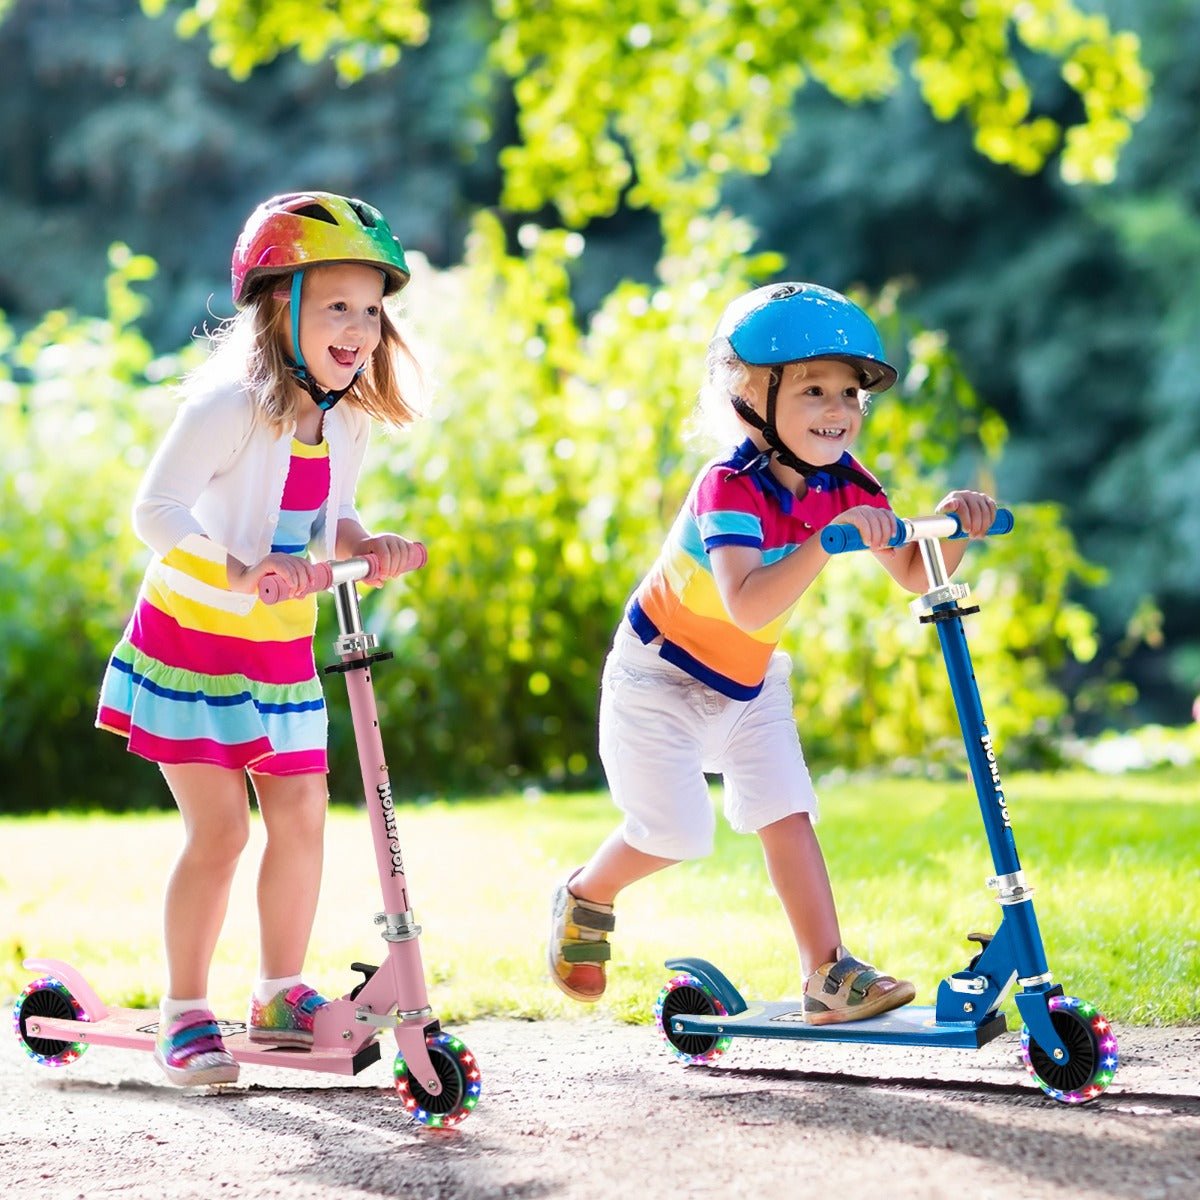 Fun and Safety Combined: LED Light Kick Scooter for Kids